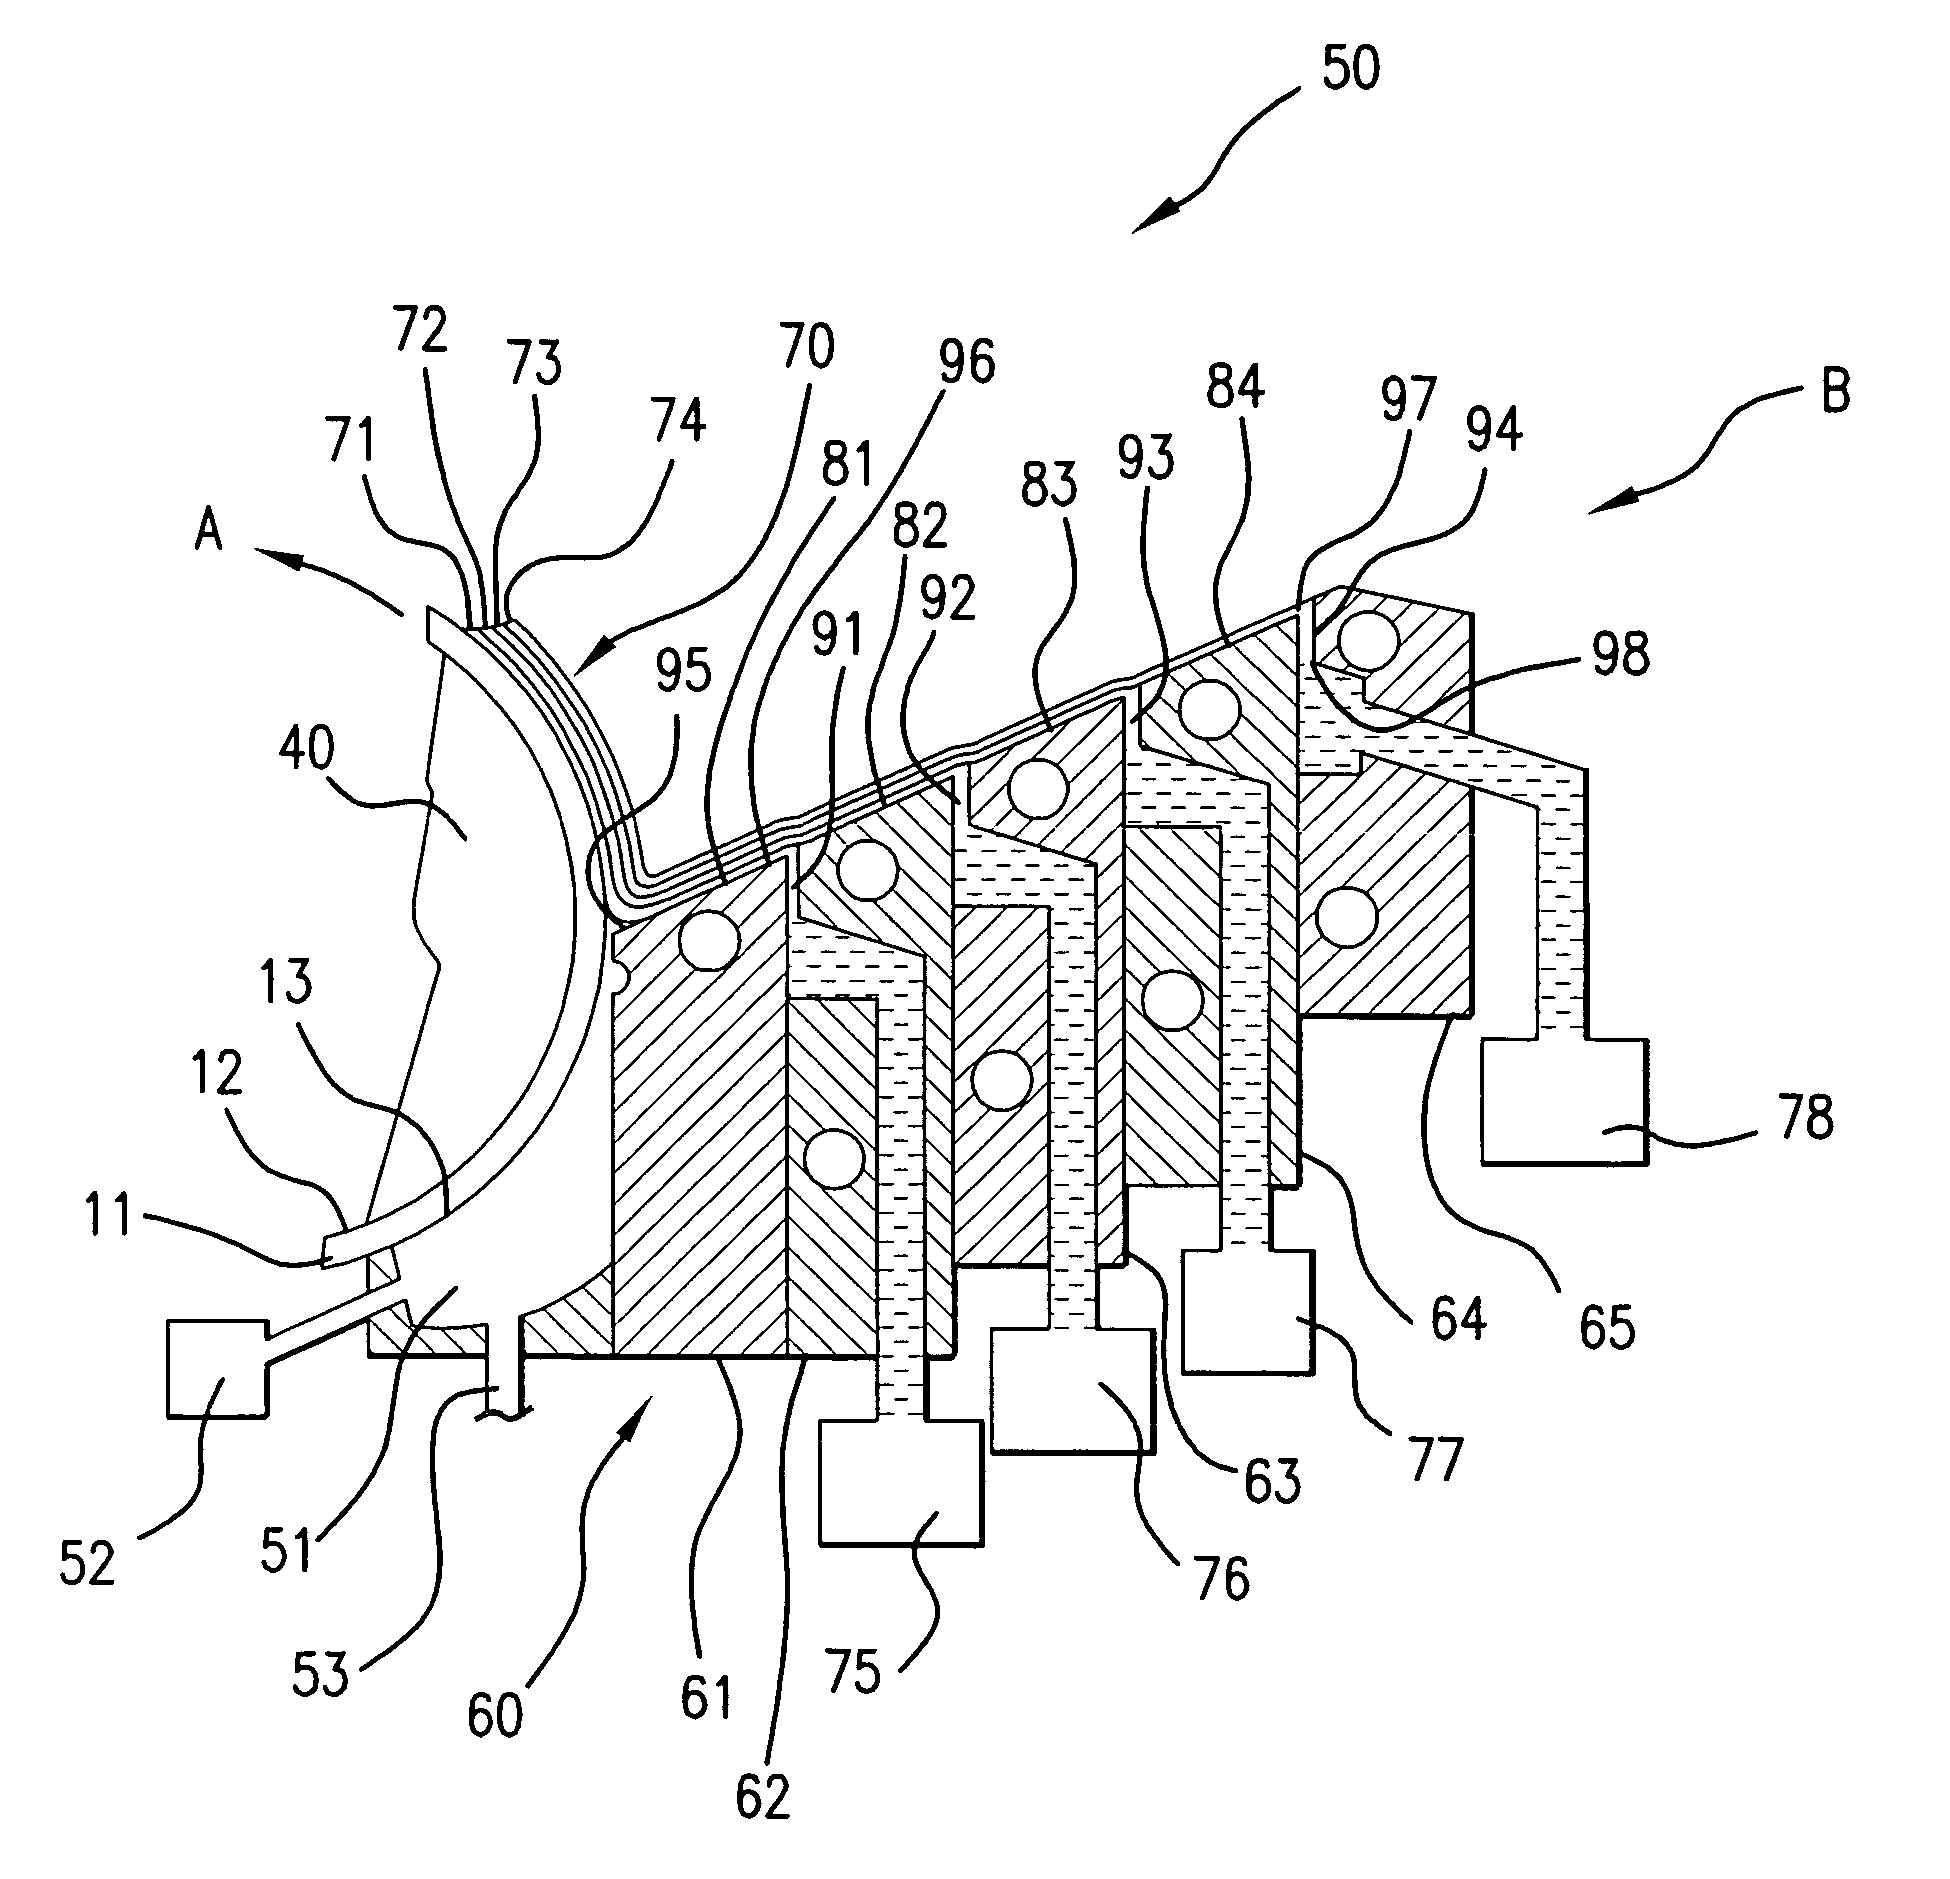 Method and apparatus for coating a medical device using a coating head